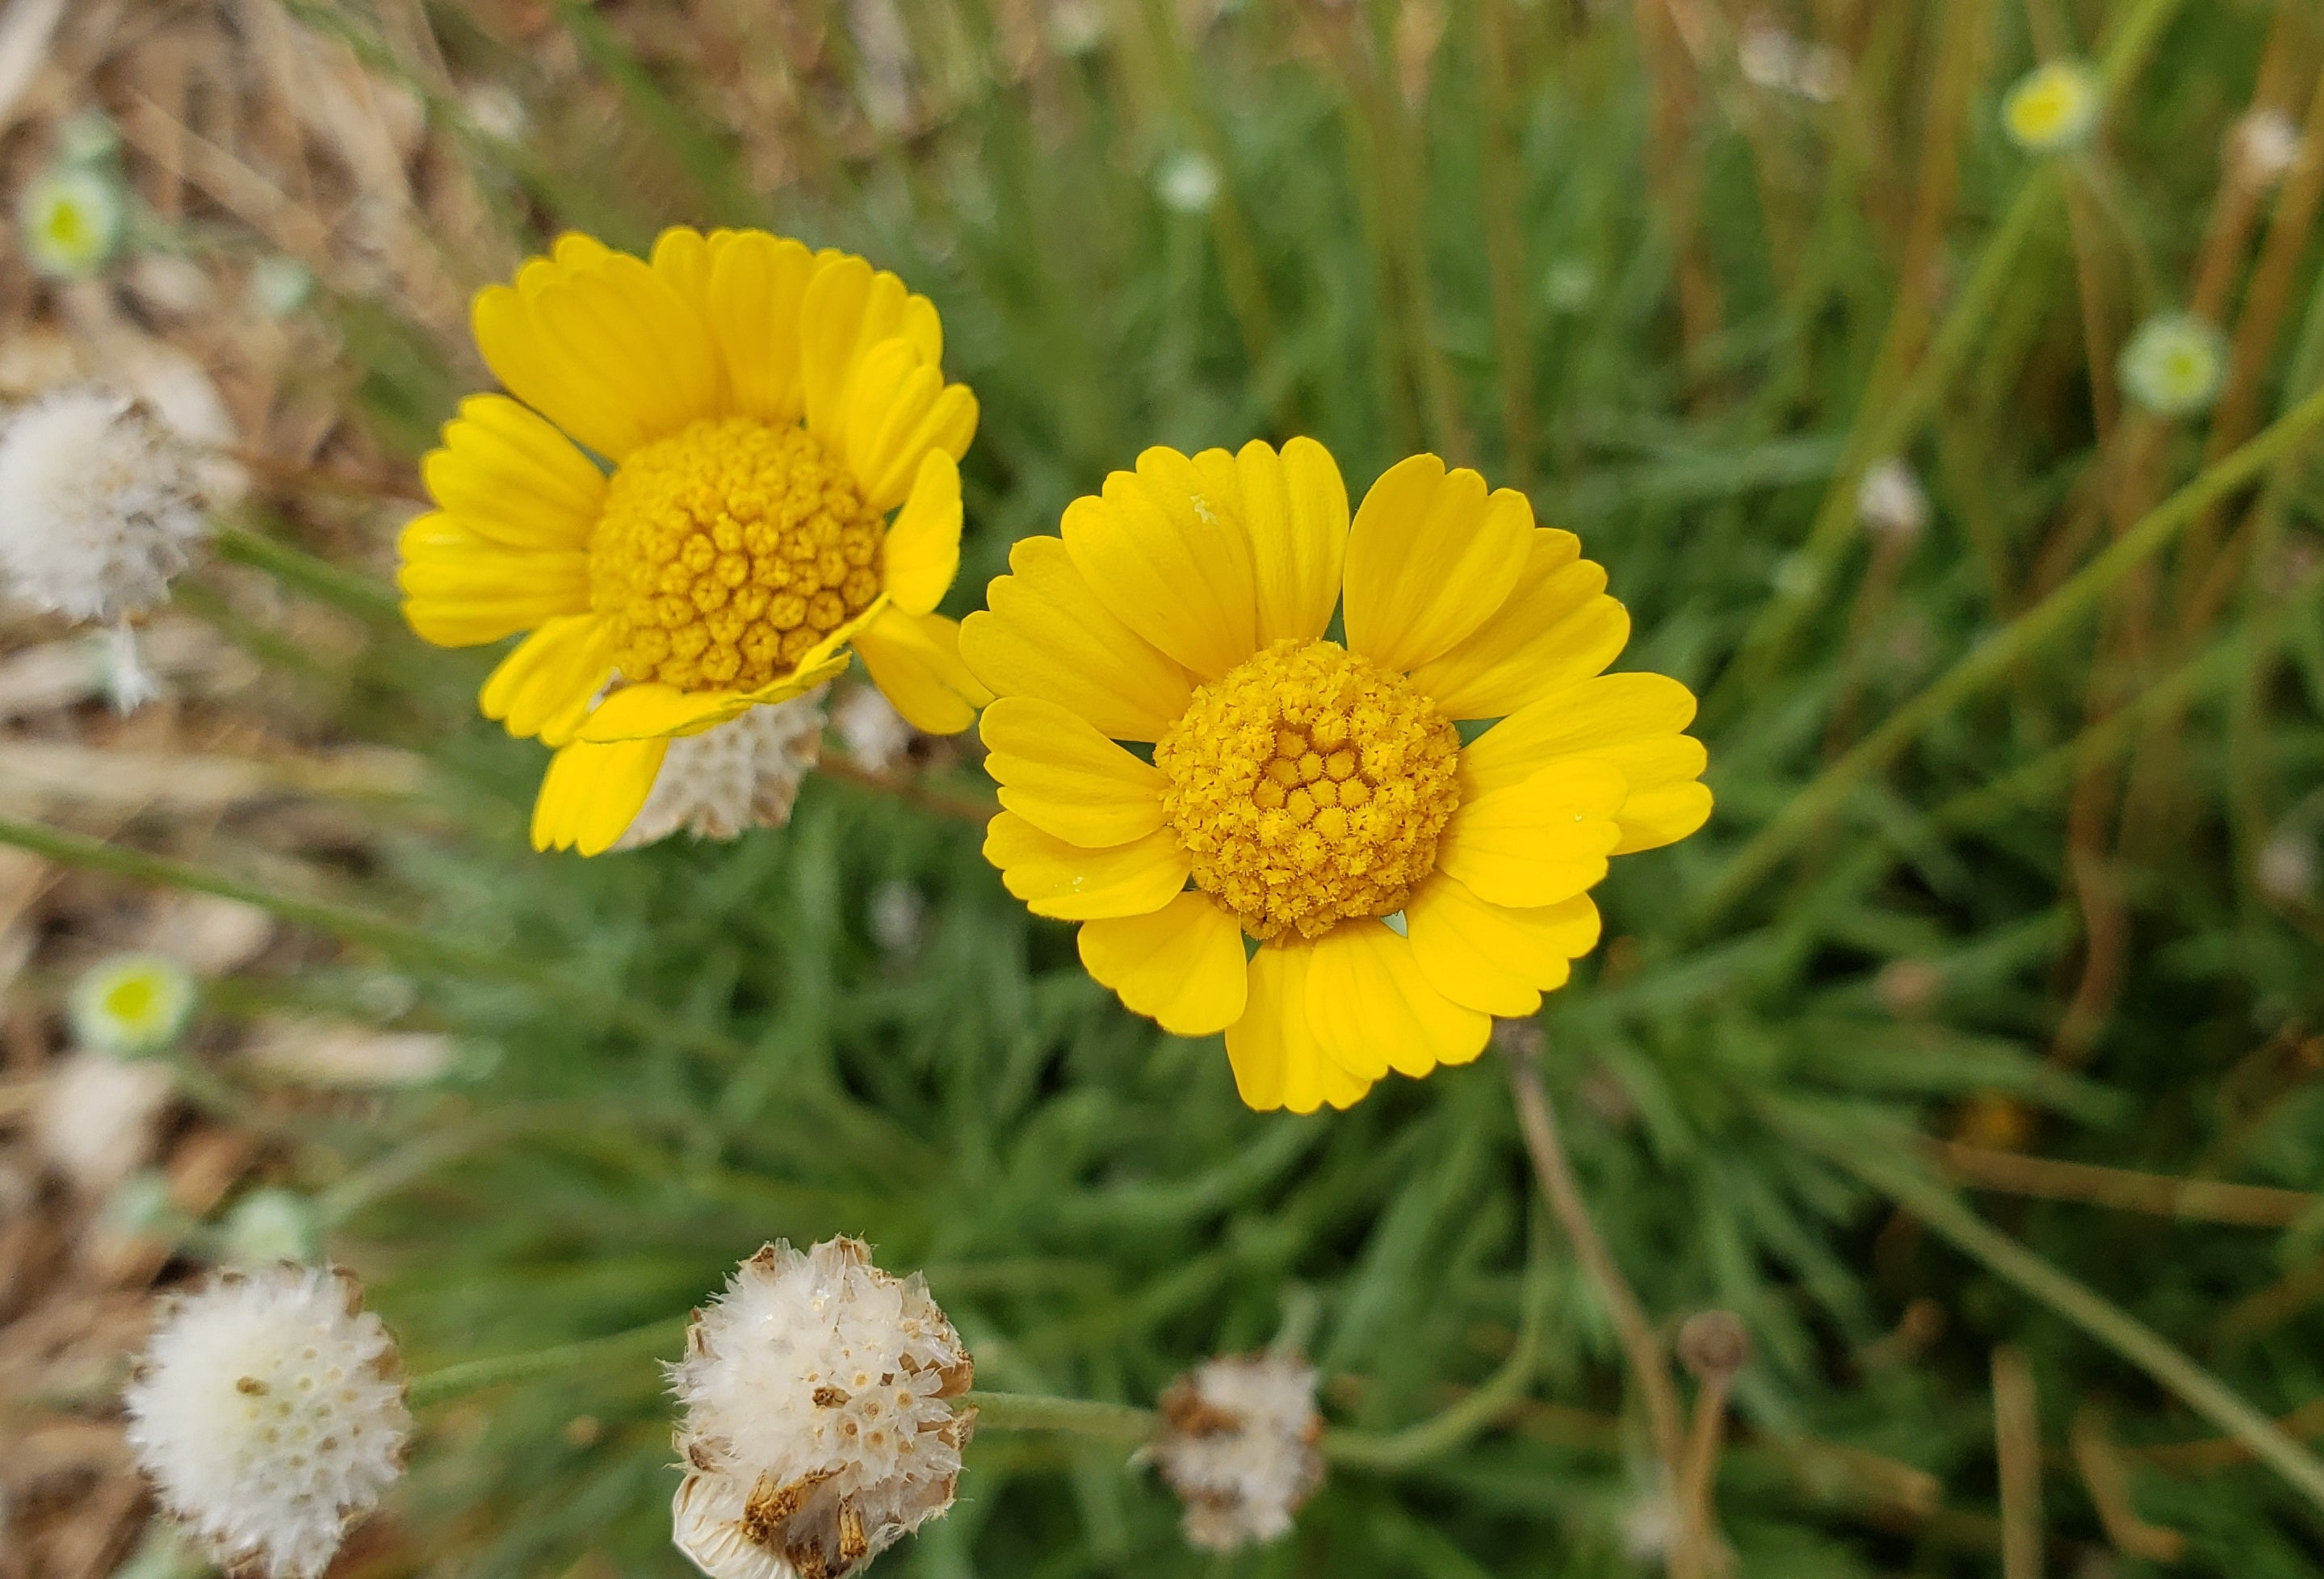 13 Recommmended Plants With Daisy-Like Flowers